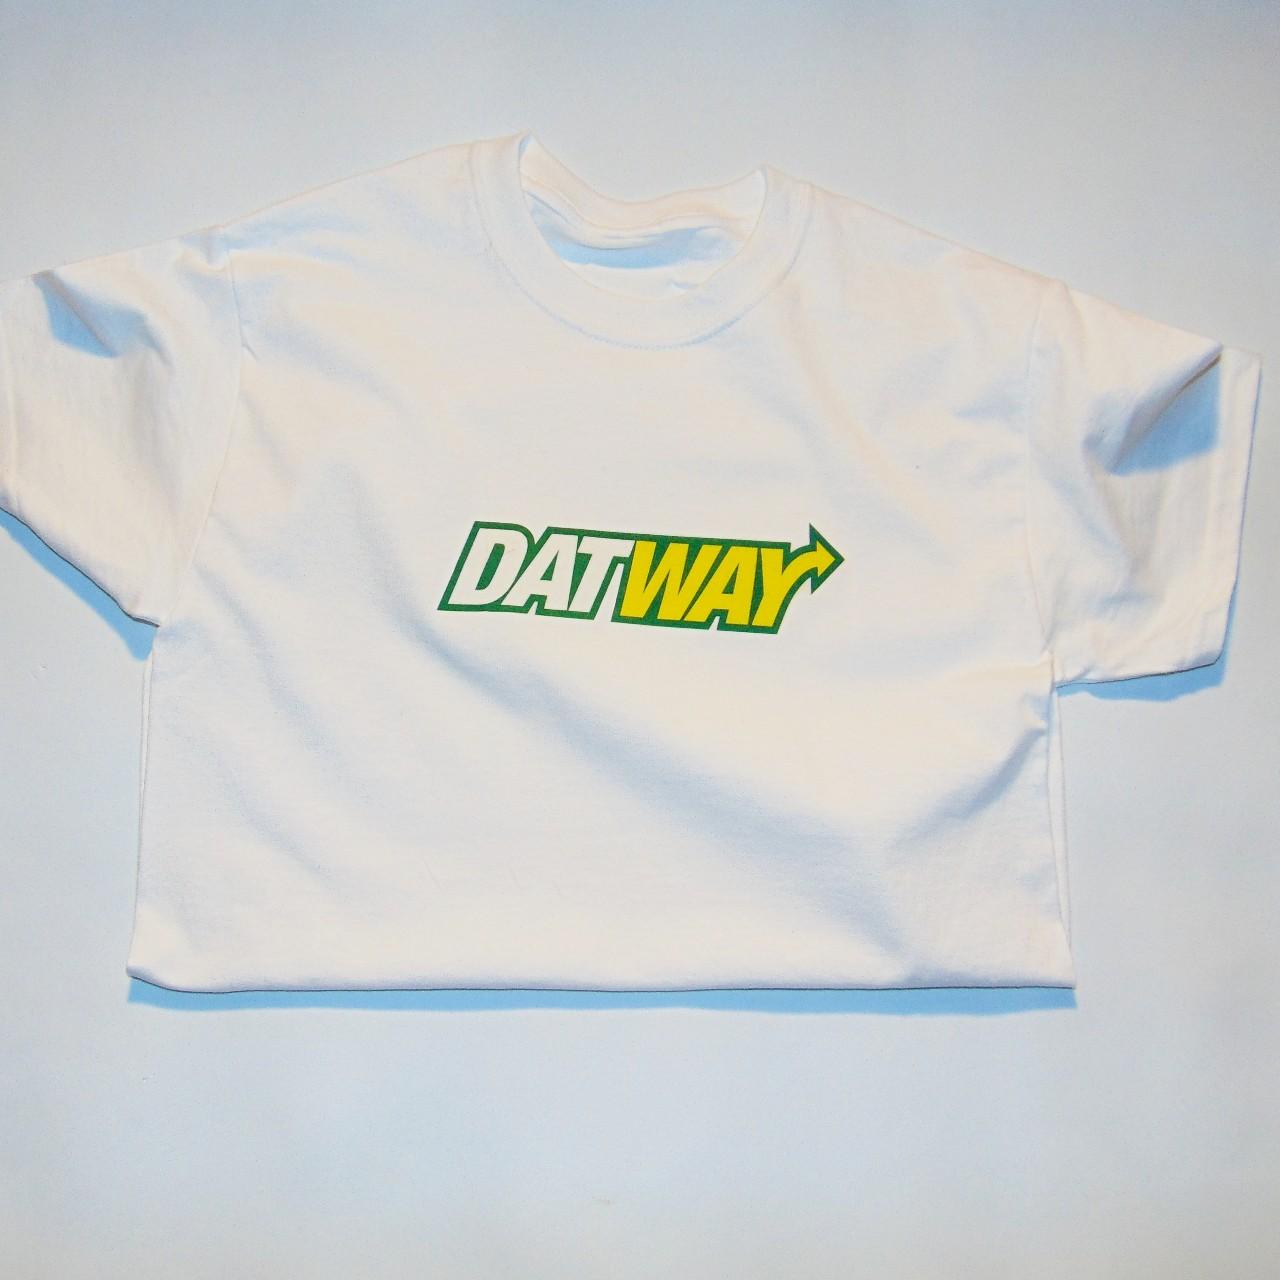 Product Image 1 - Stand out with this DATWAY